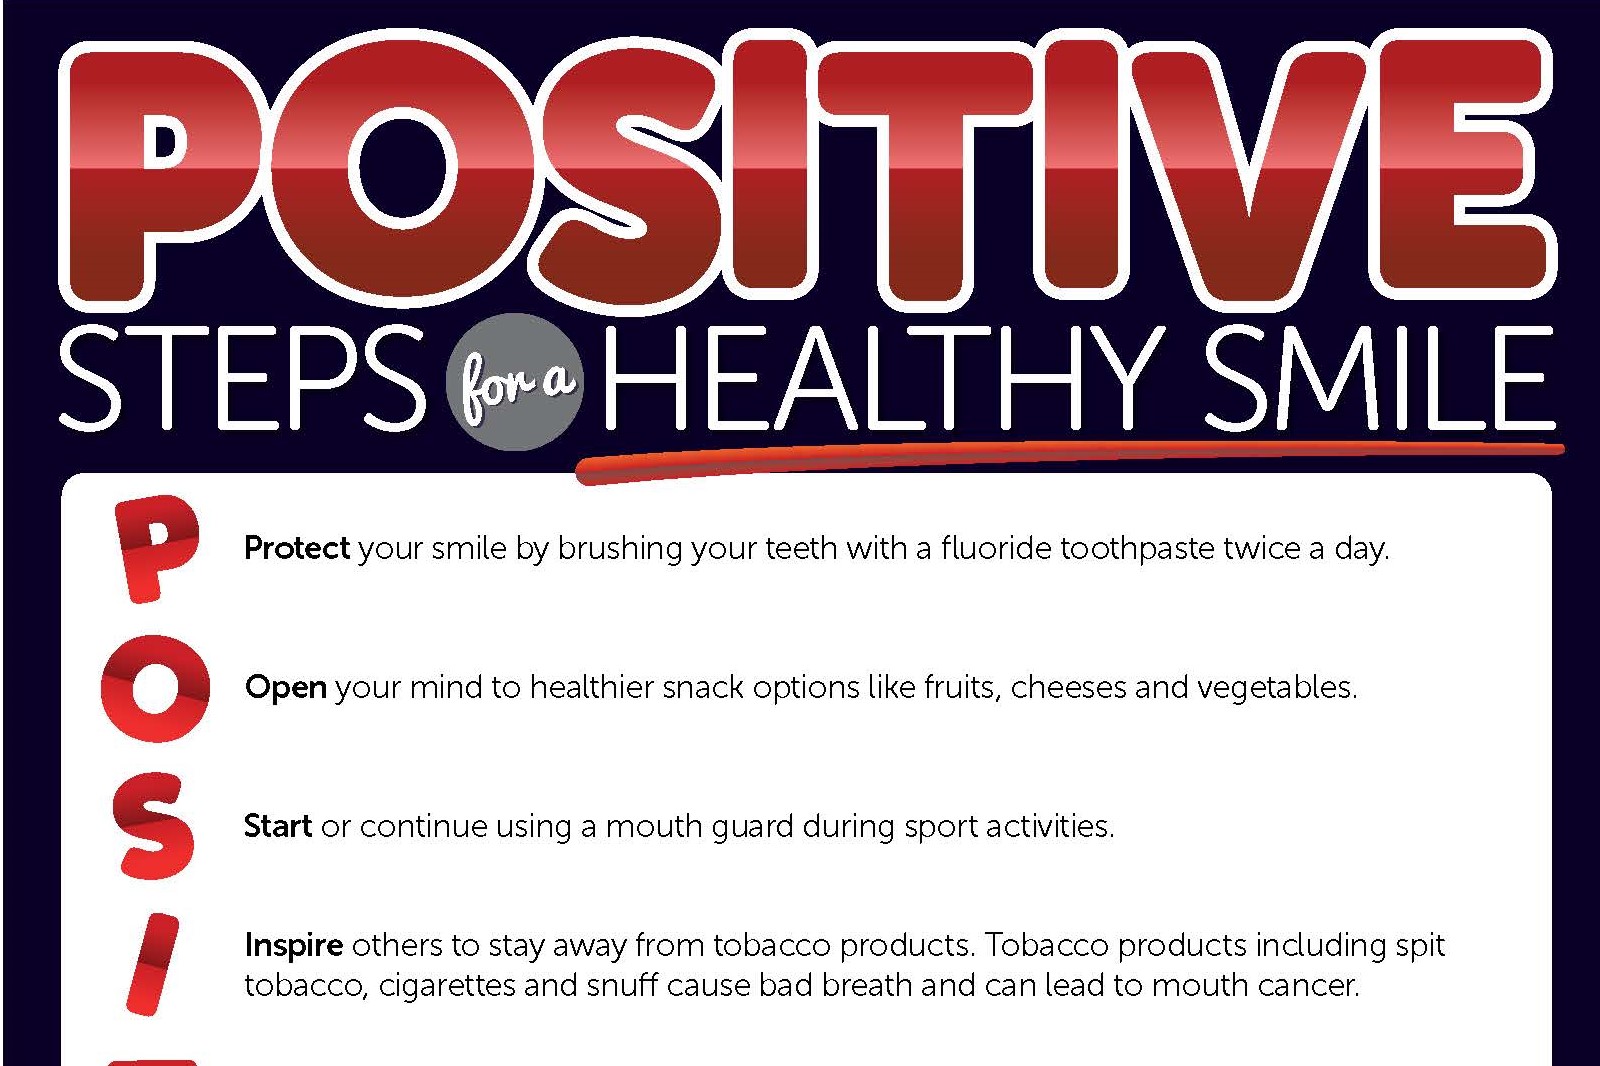 Positive Steps for a Healthy Smile 2